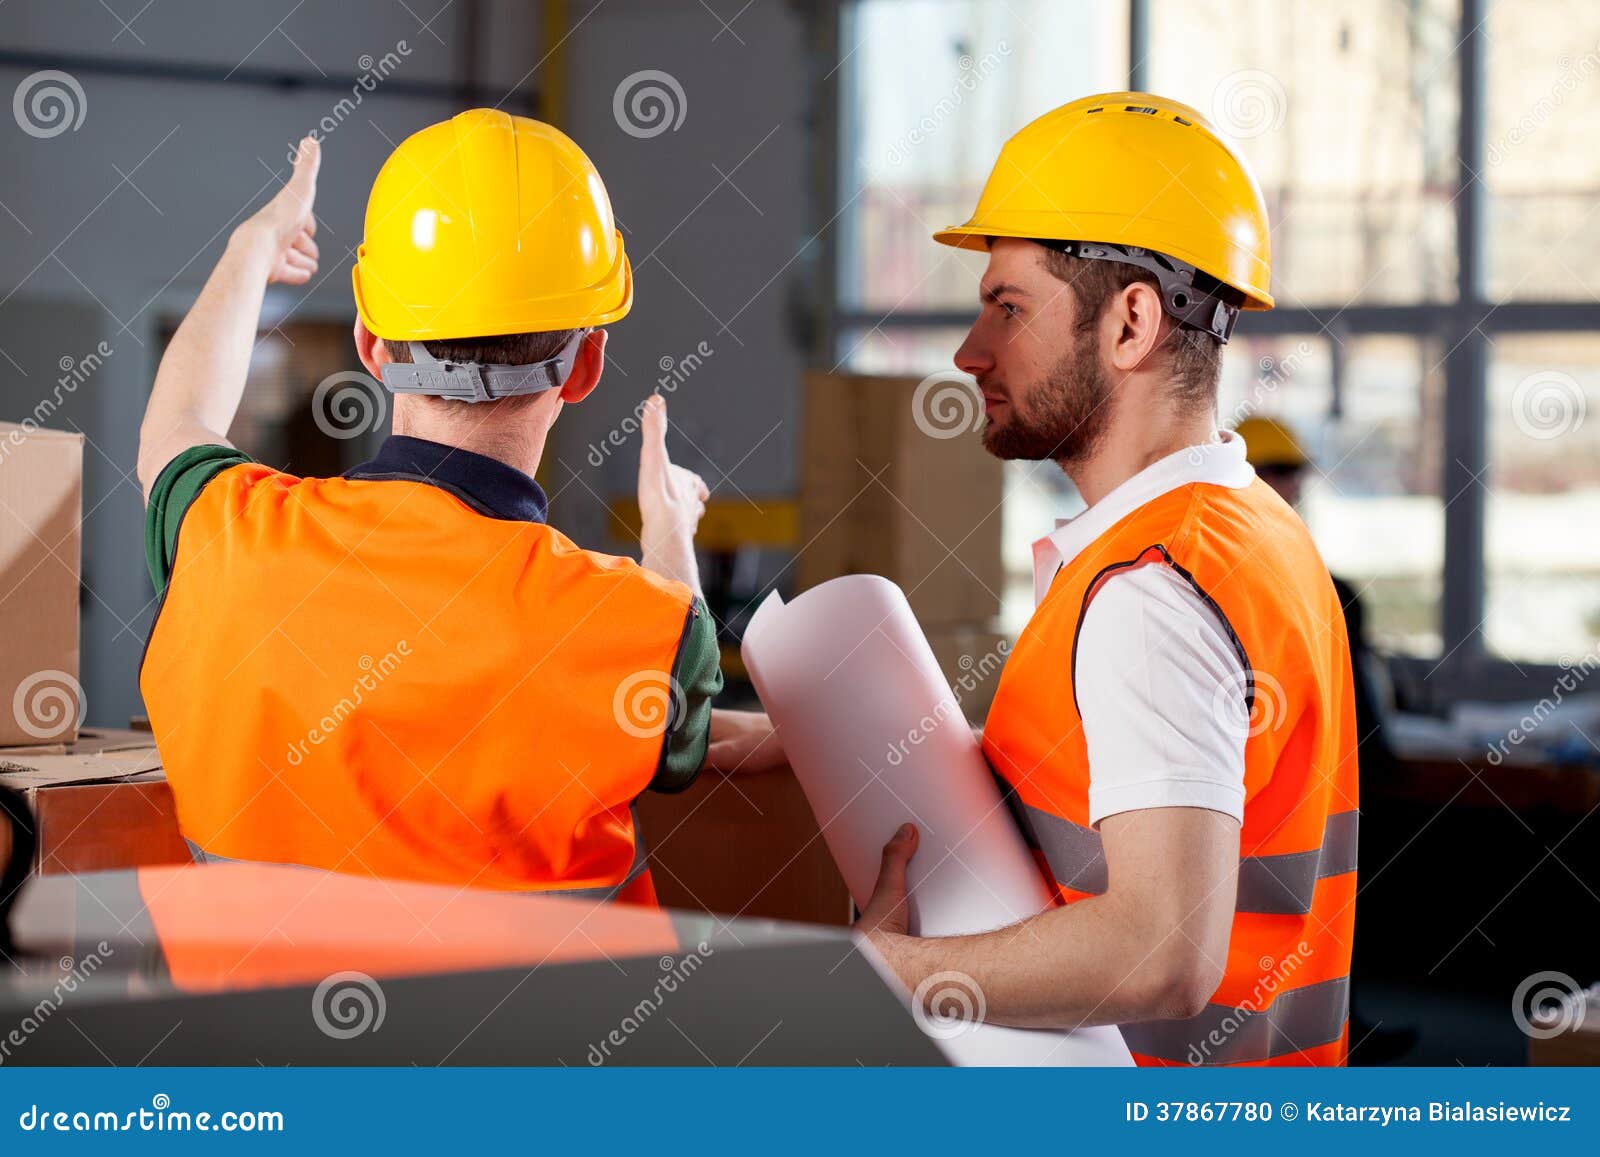 two factory engineers discussing